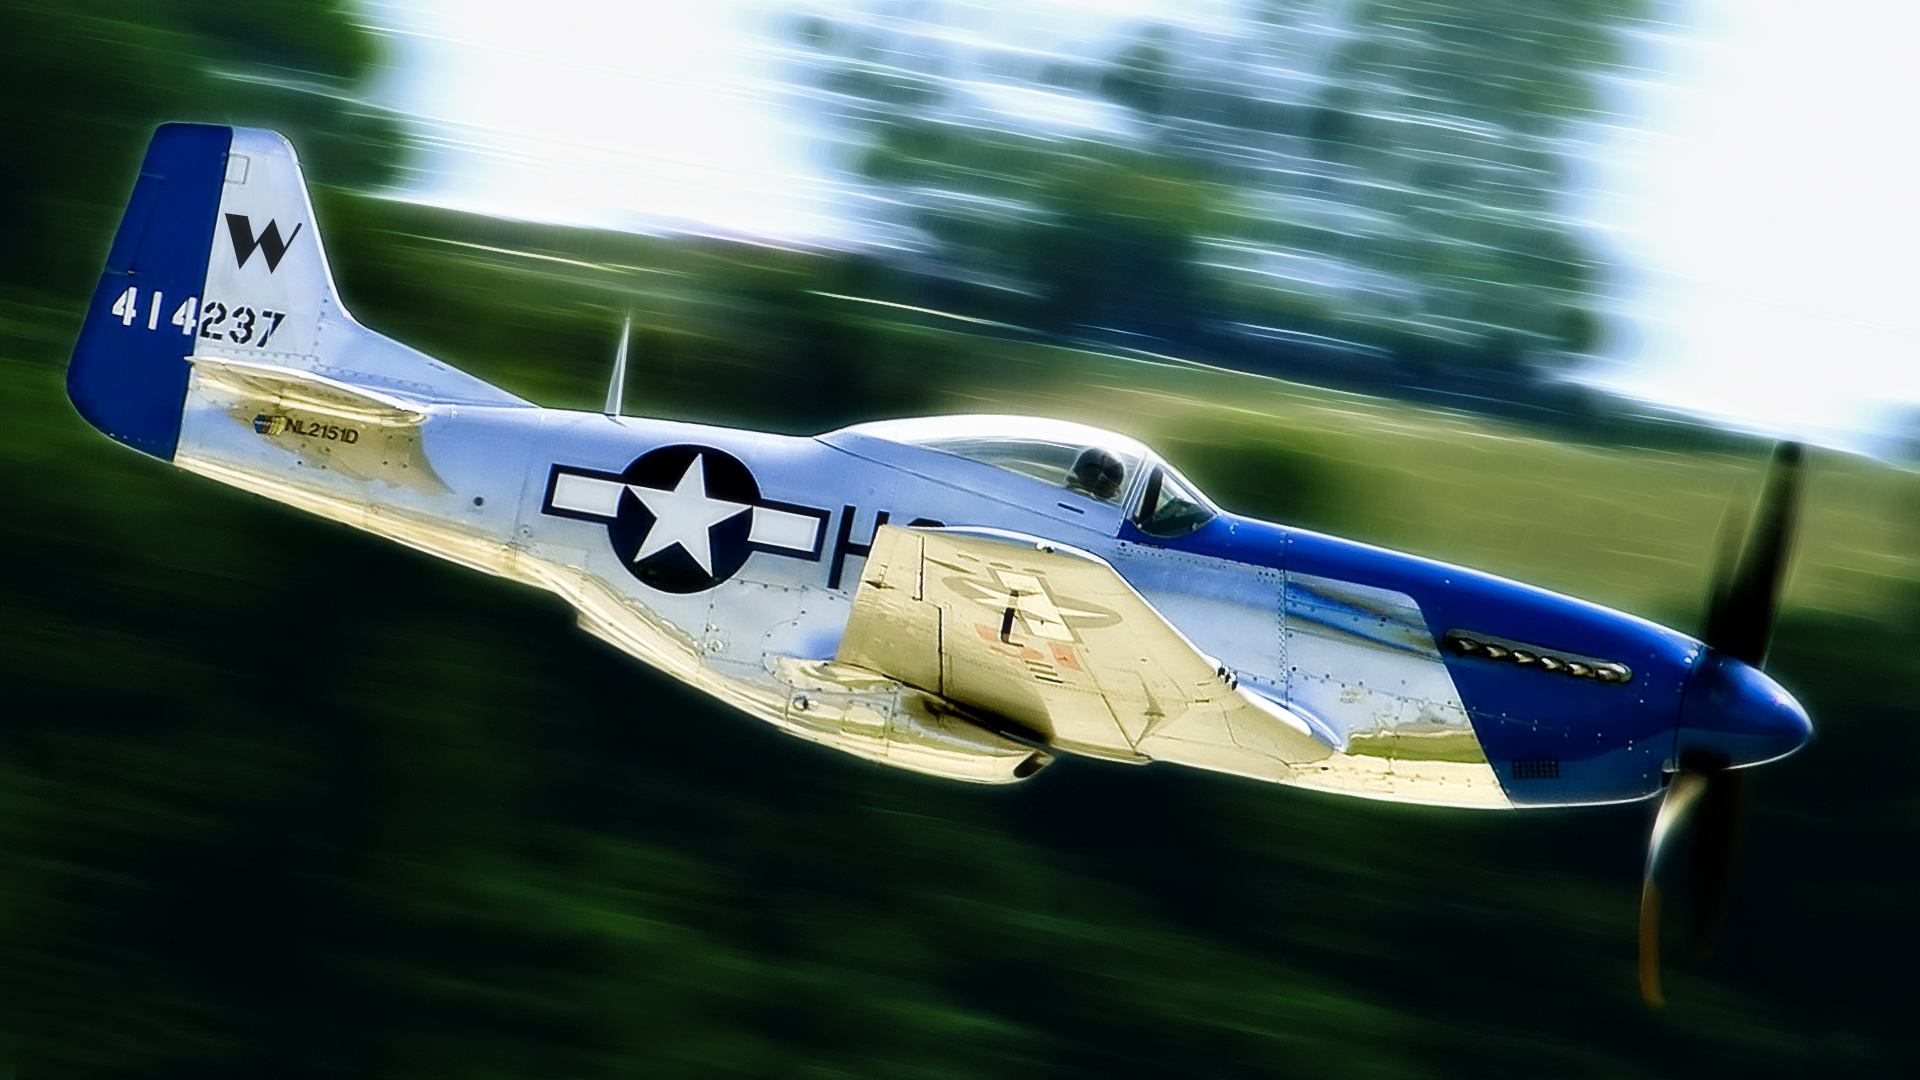 50 North American P51 Mustang HD Wallpapers and Backgrounds